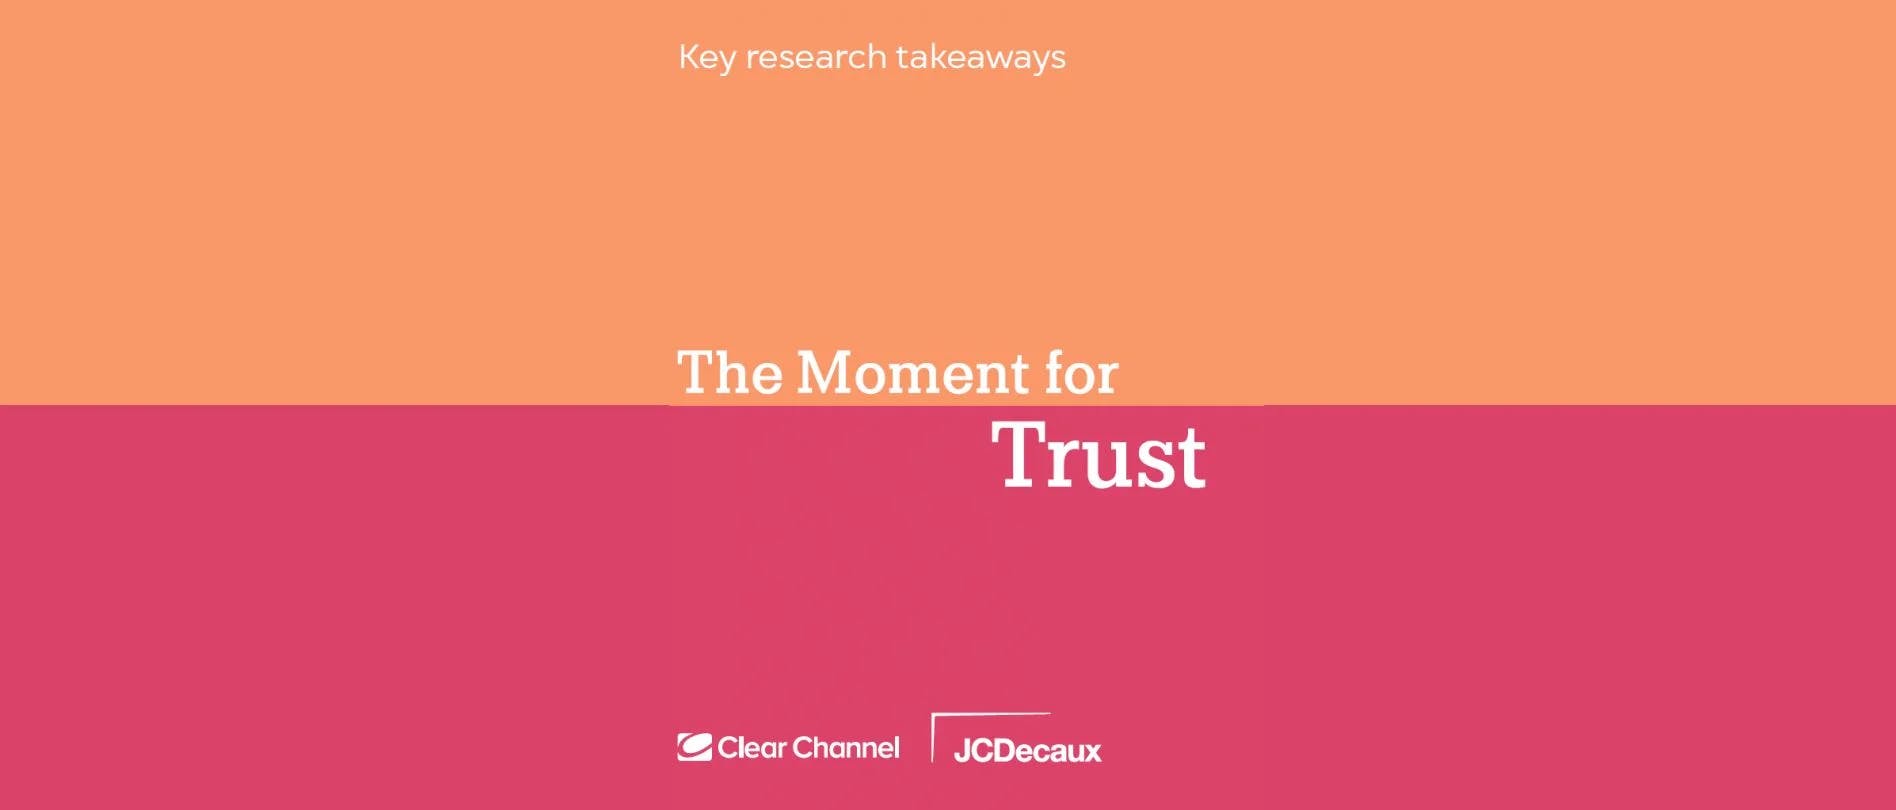 How different channels drive trust